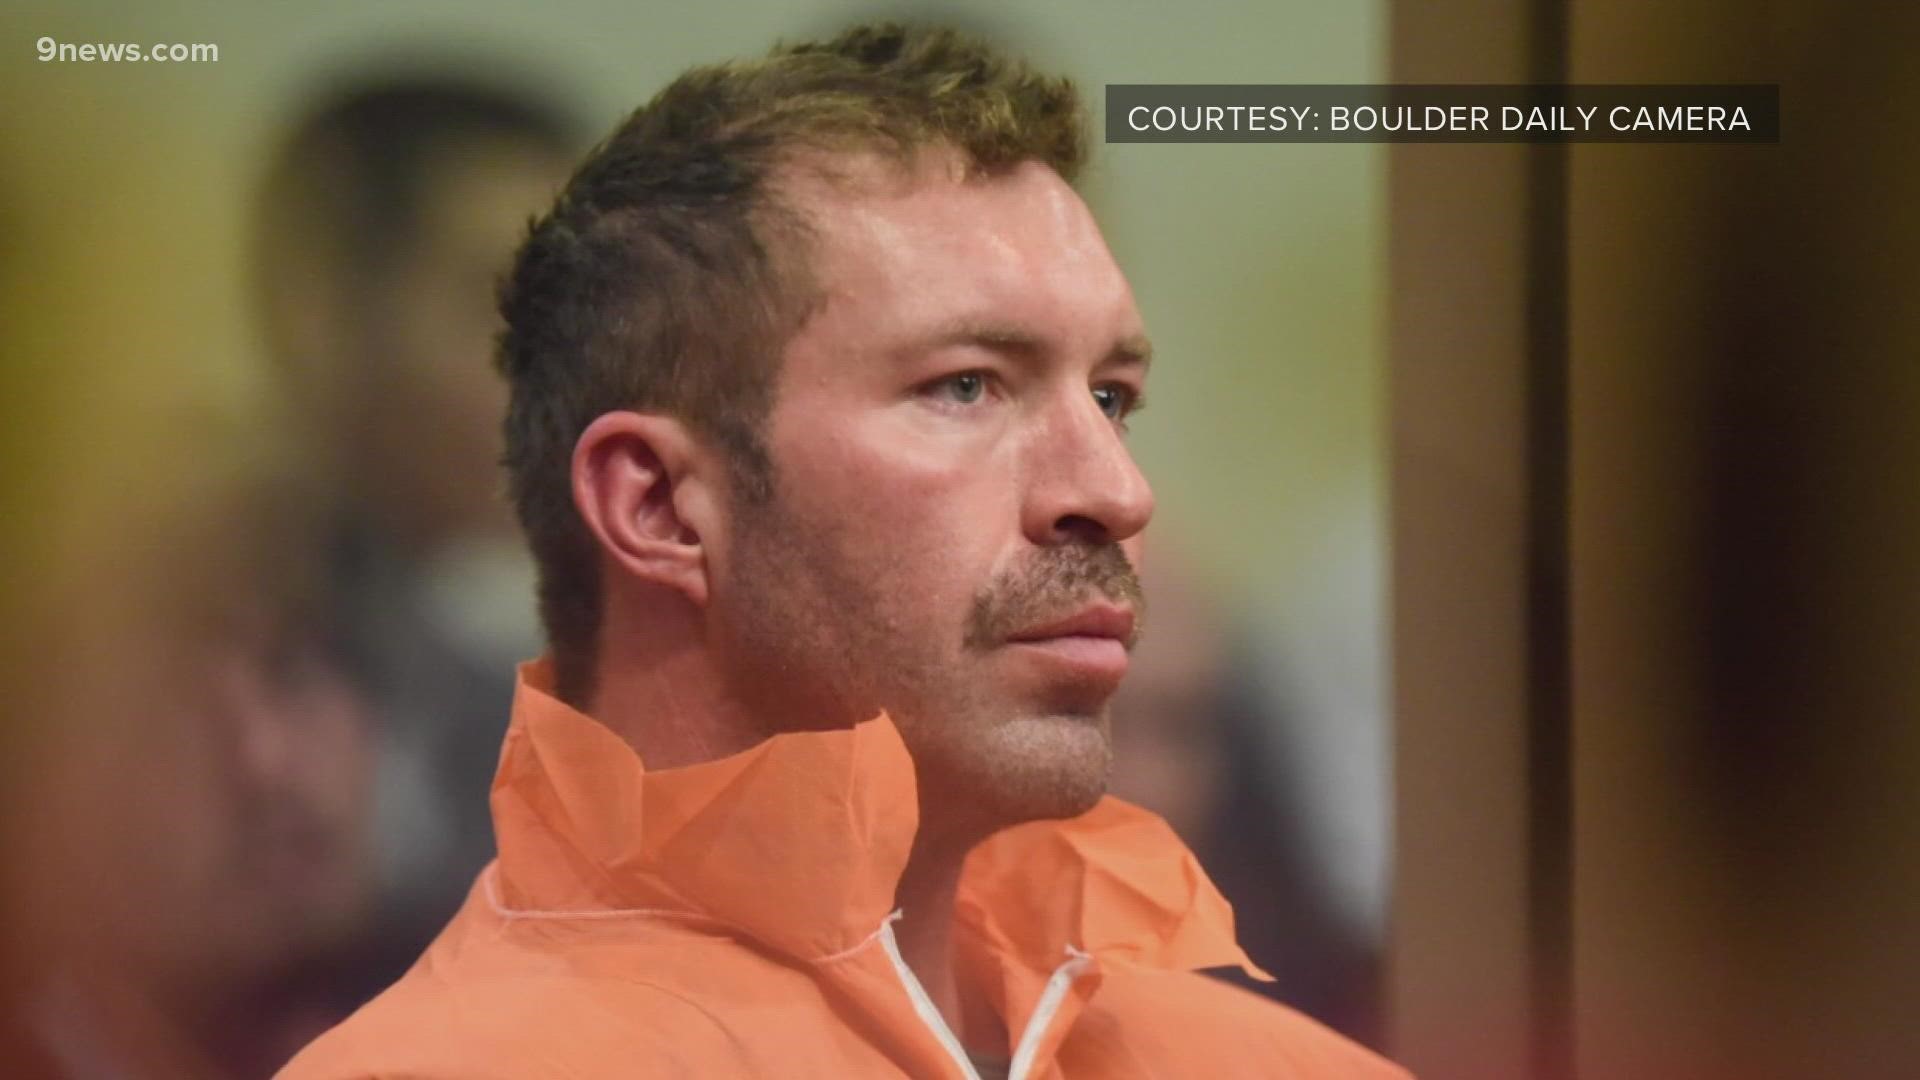 Justin Bannan was accused of shooting a woman in the shoulder in 2019.